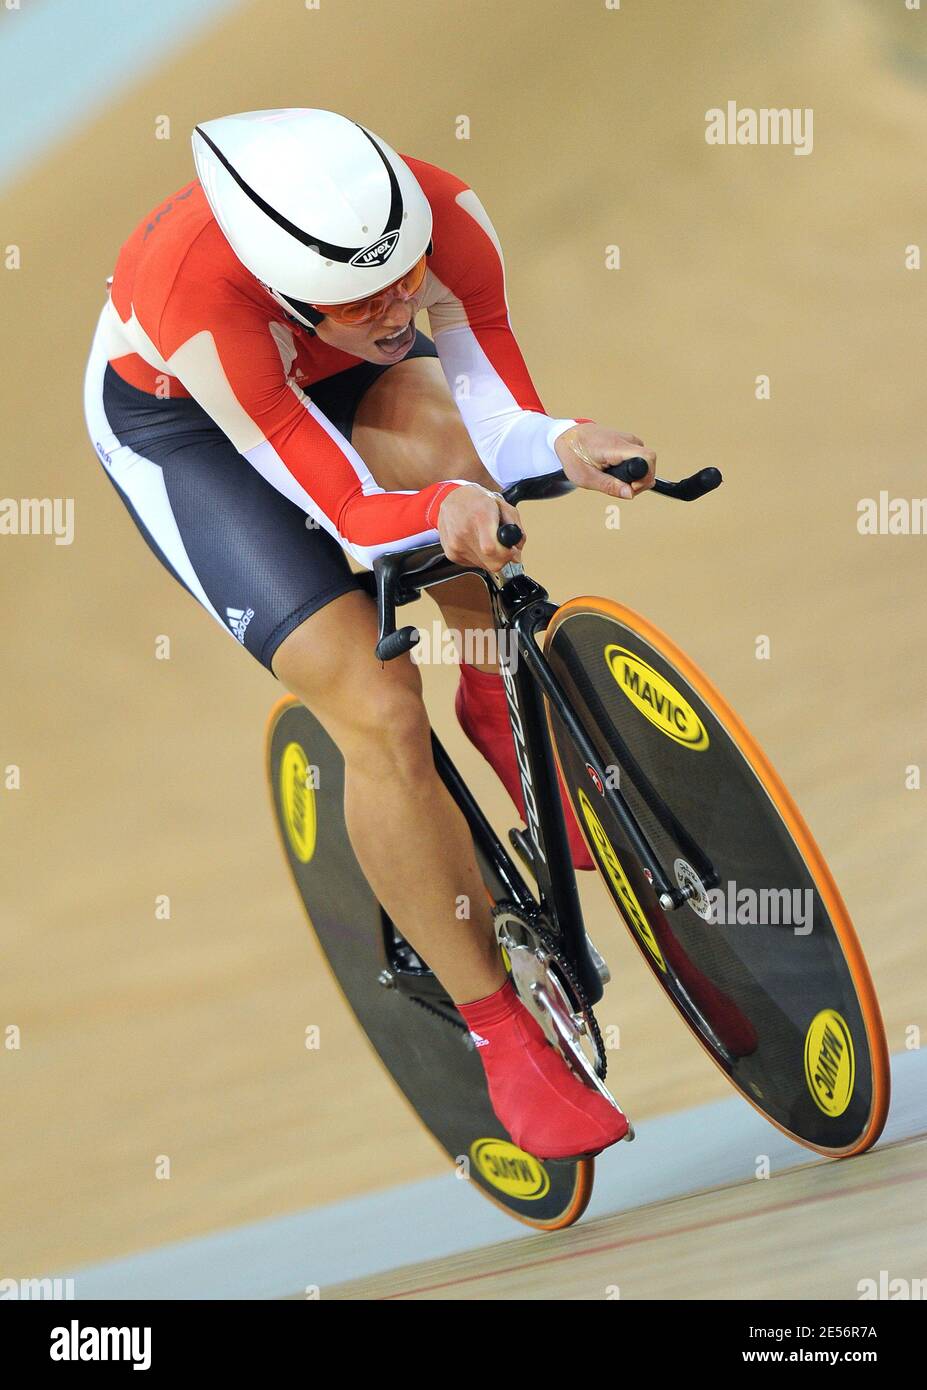 Germany's Verena Jooss competes on women's individual pursuit during the Beijing Olympic Games Day 7 at the Laoshan Velodrome in Beijing, China on August 15, 2008. Photo by Gouhier-Hahn-Nebinger/Cameleon/ABACAPRESS.COM Stock Photo